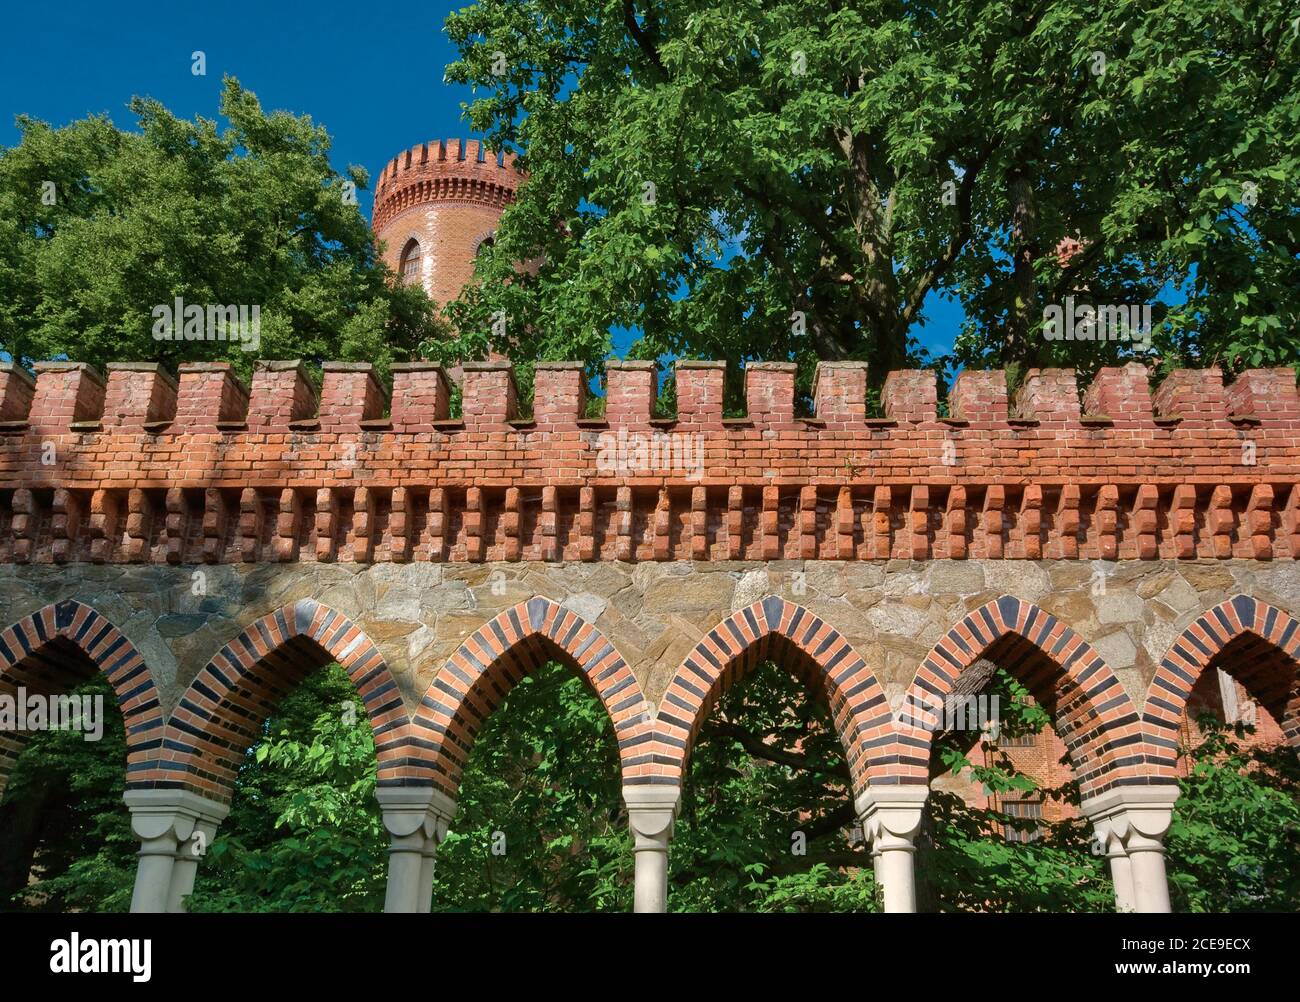 Neogothic crenellations and arches at Castle at Kamieniec Ząbkowicki in Lower Silesia region, Poland Stock Photo